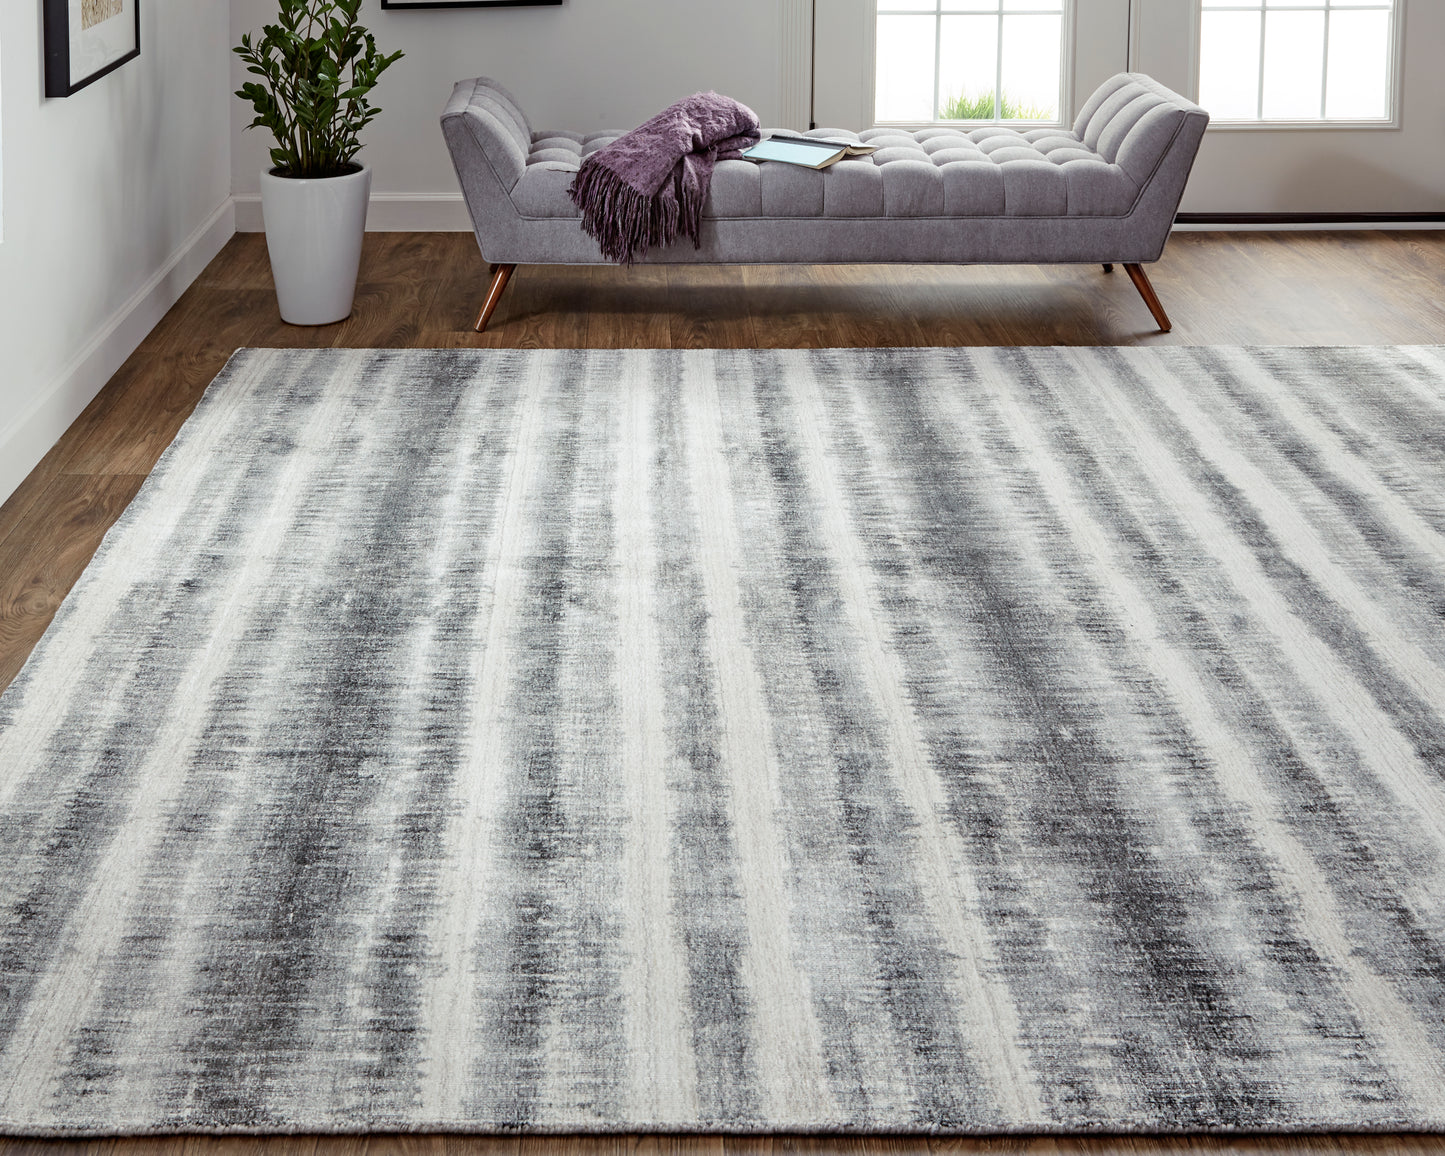 Mackay 8824F Hand Woven Synthetic Blend Indoor Area Rug by Feizy Rugs